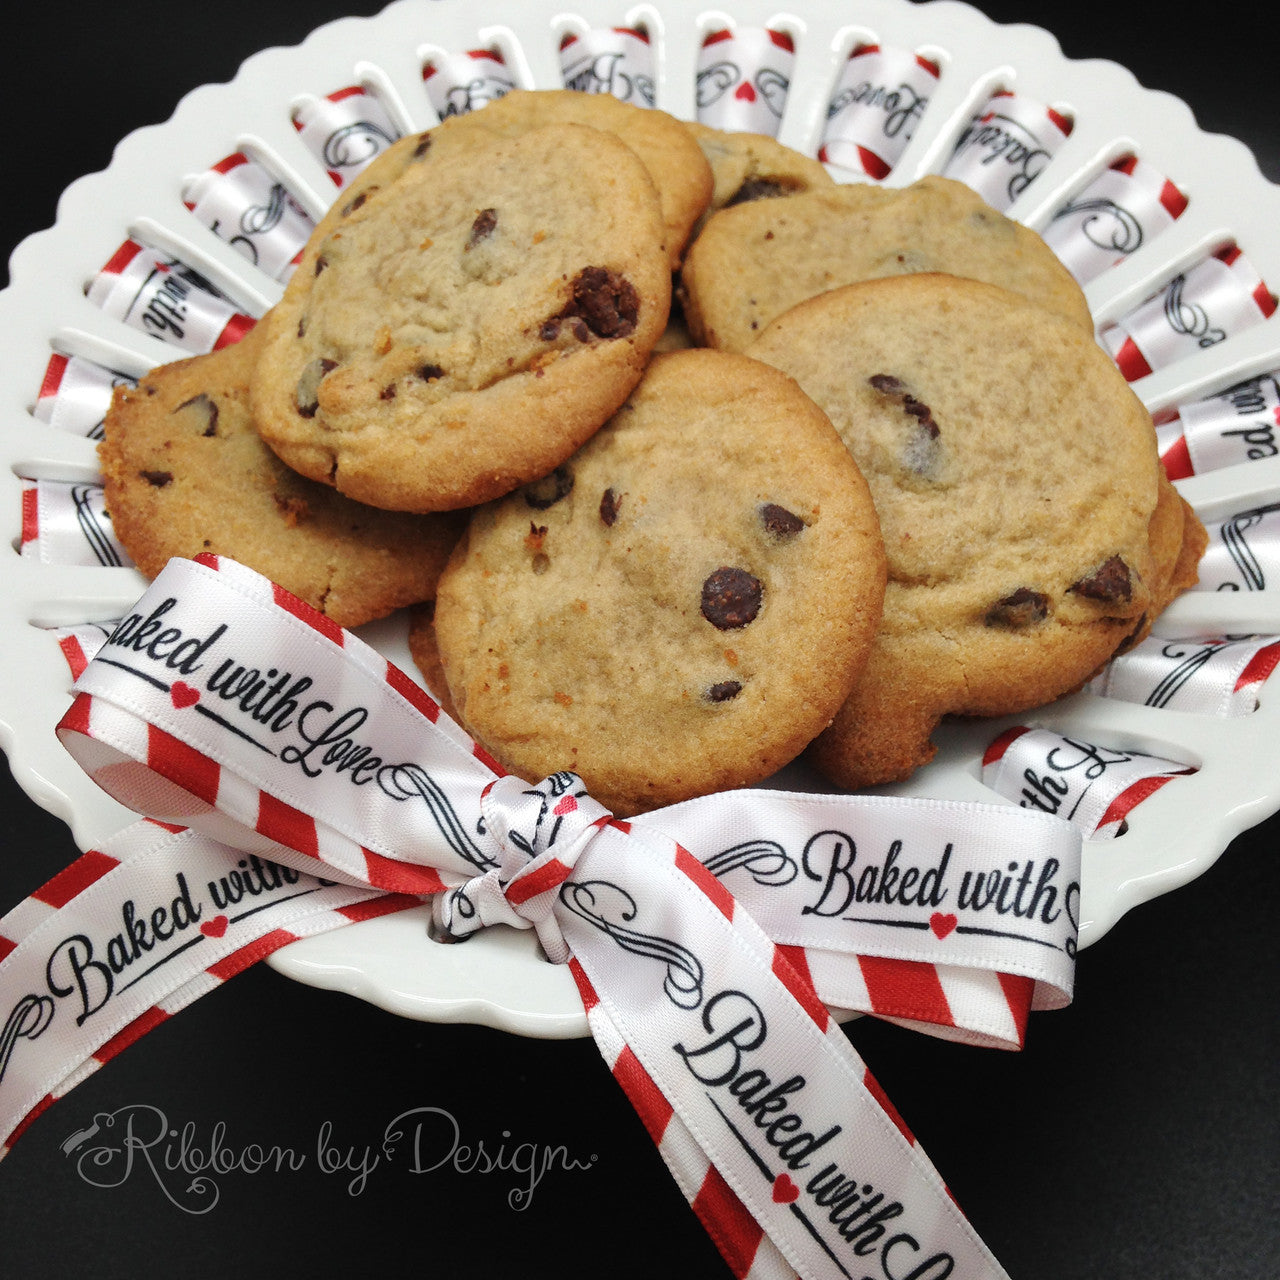 Mixing Baked with Love with our red and white stripes dresses up this cookie plate in style!